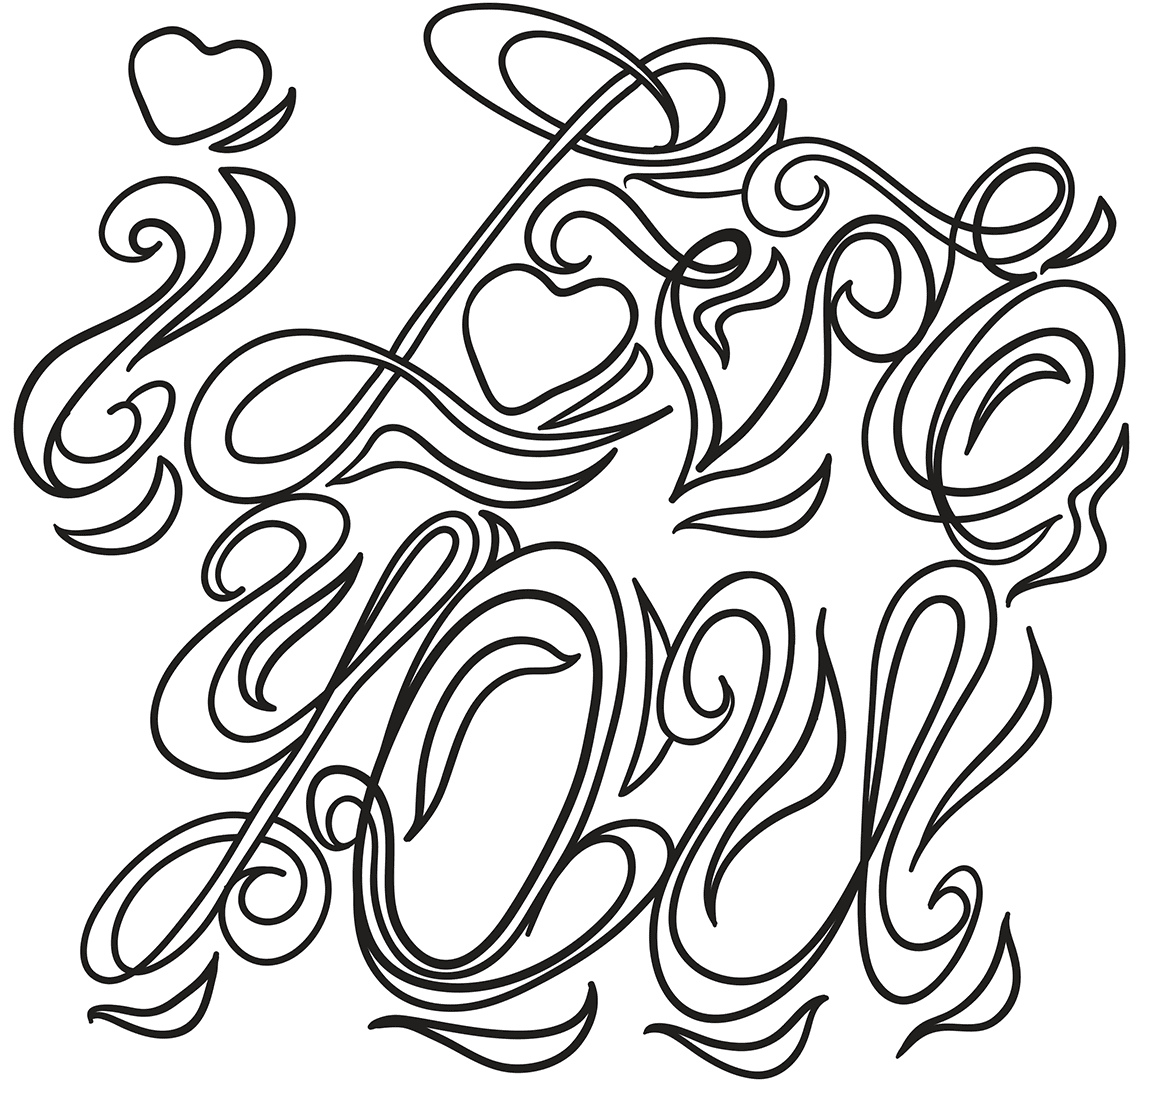 I Love You Coloring Page Coloring Page